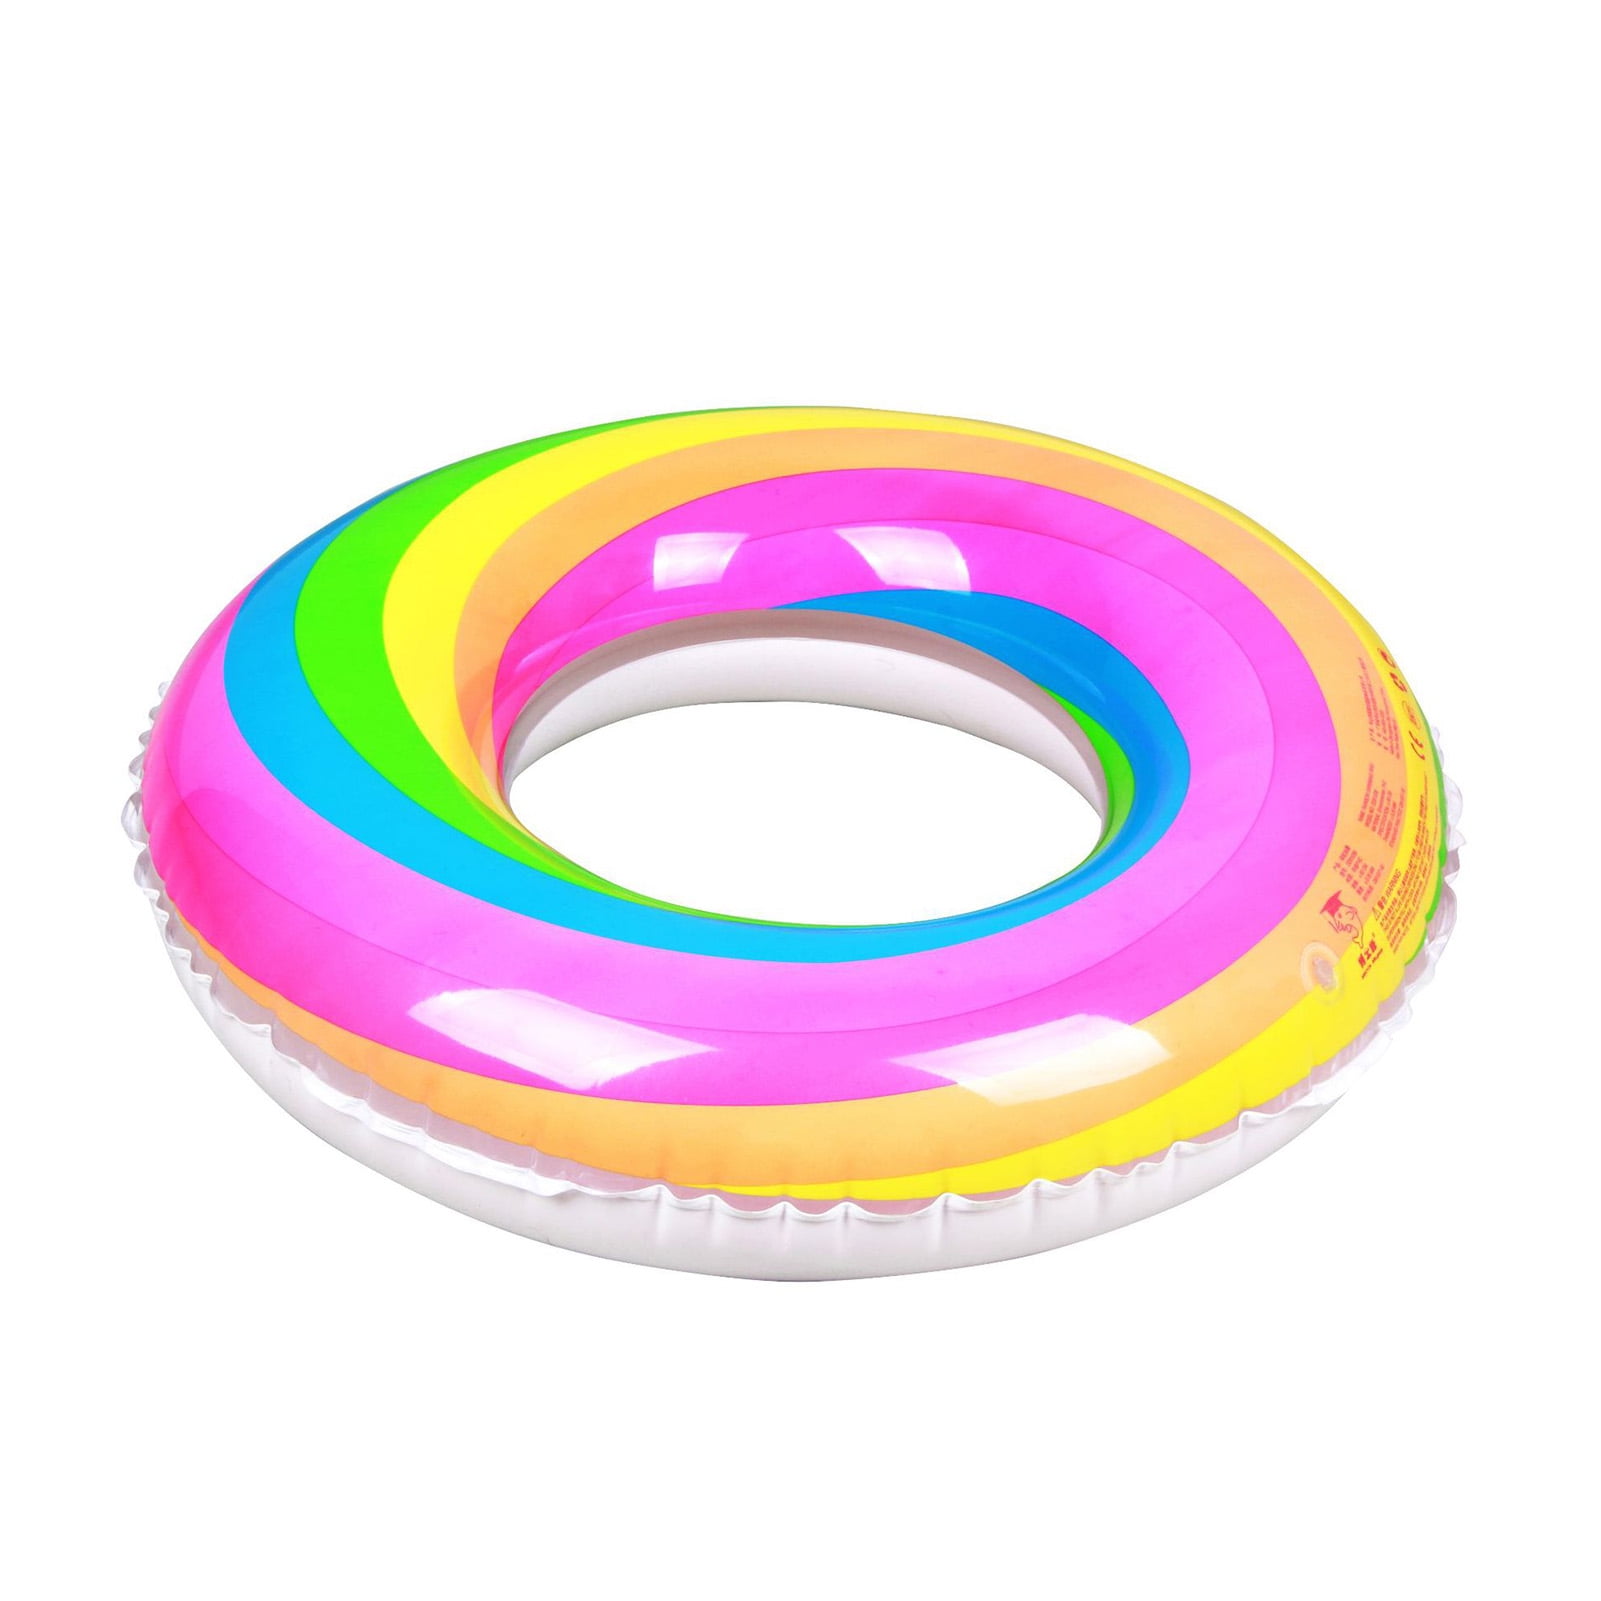 Details about   Inflatable Swimming Rainbow Pool Float Circle Air Mattress Seat Summer Beach Toy 